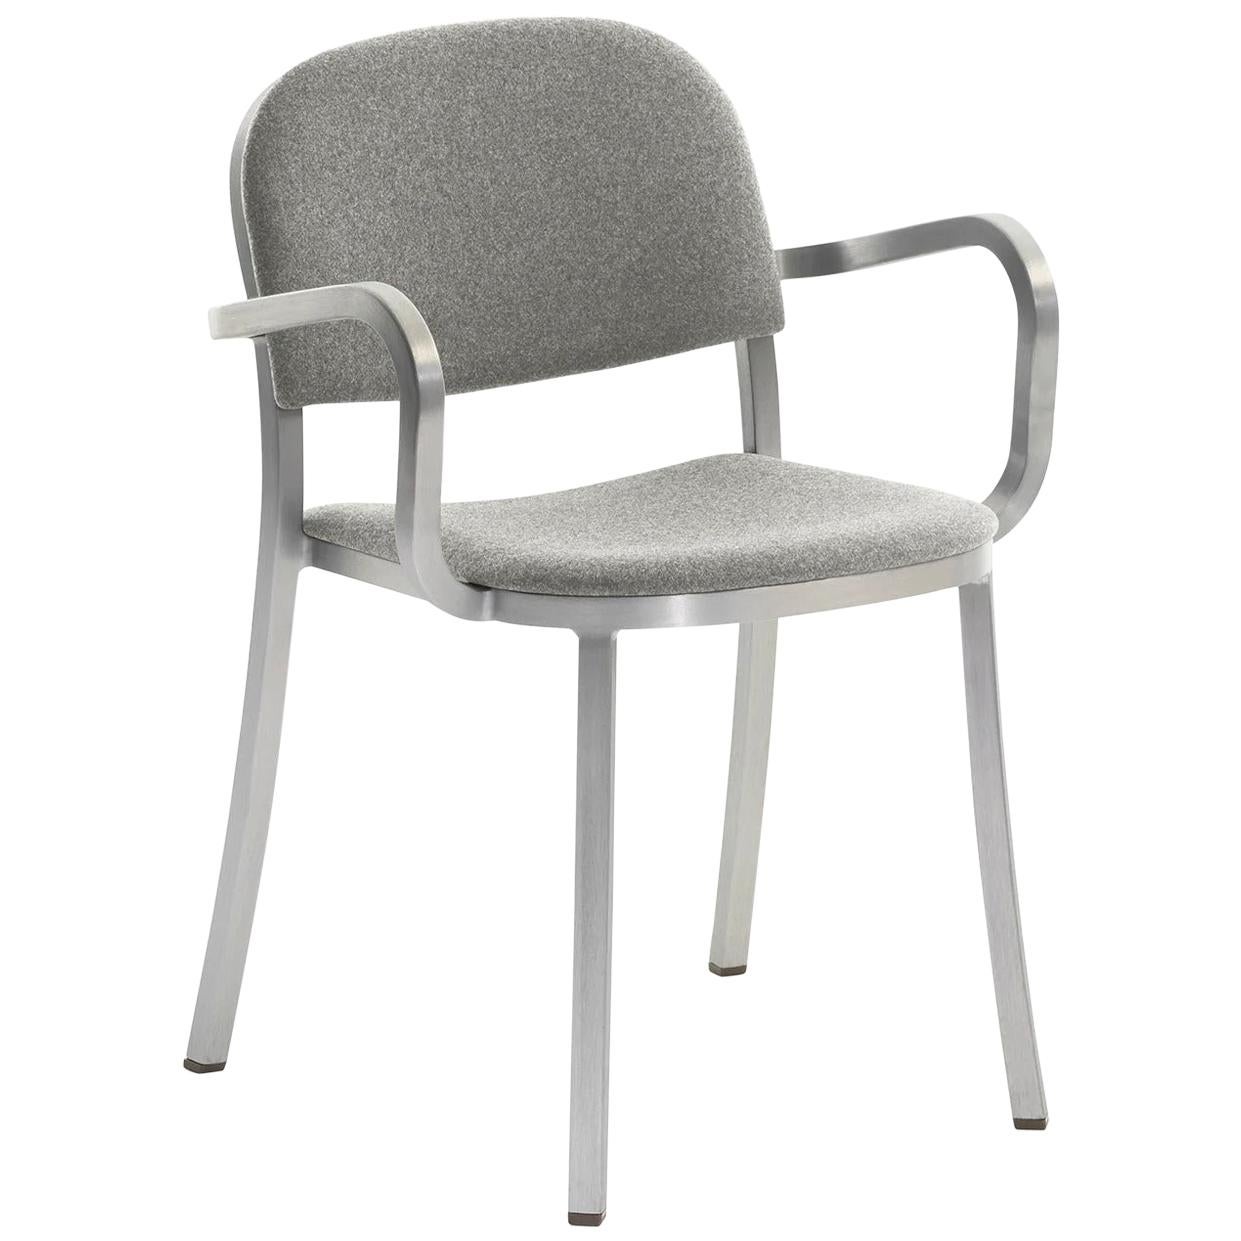 Emeco 1 Inch Armchair in Grey Upholstery & Aluminum Frame by Jasper Morrison For Sale